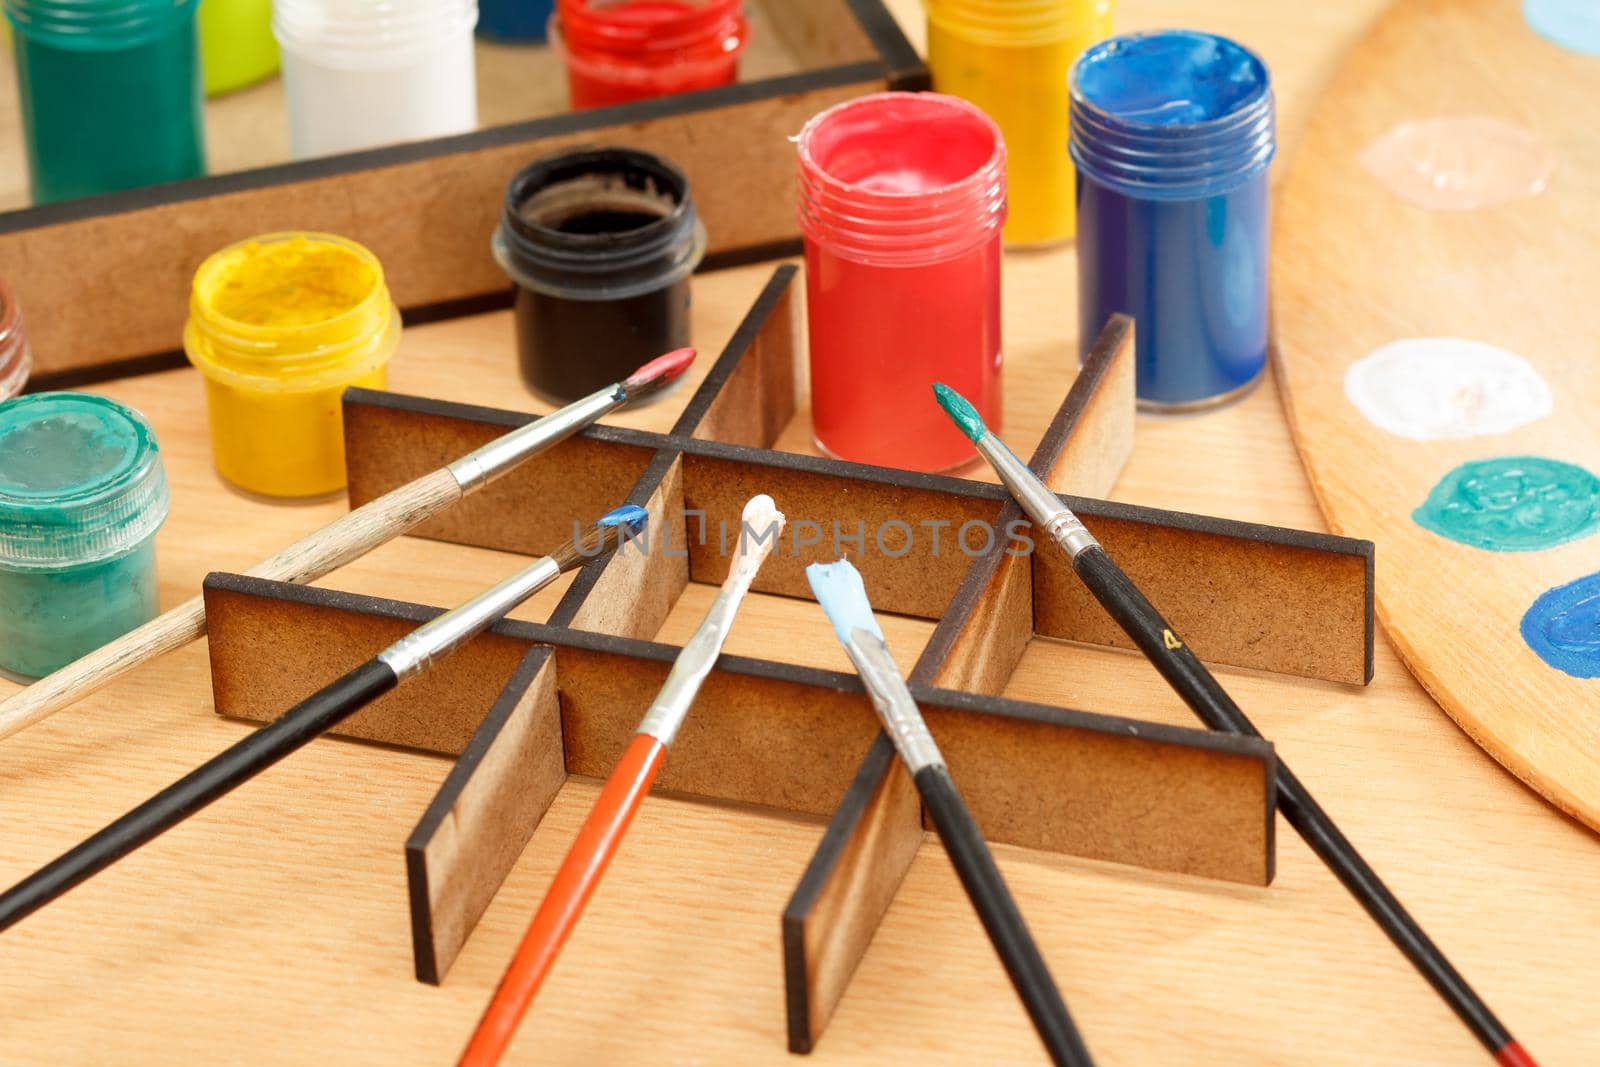 Paints and brushes on the desk ready for painting by mvg6894